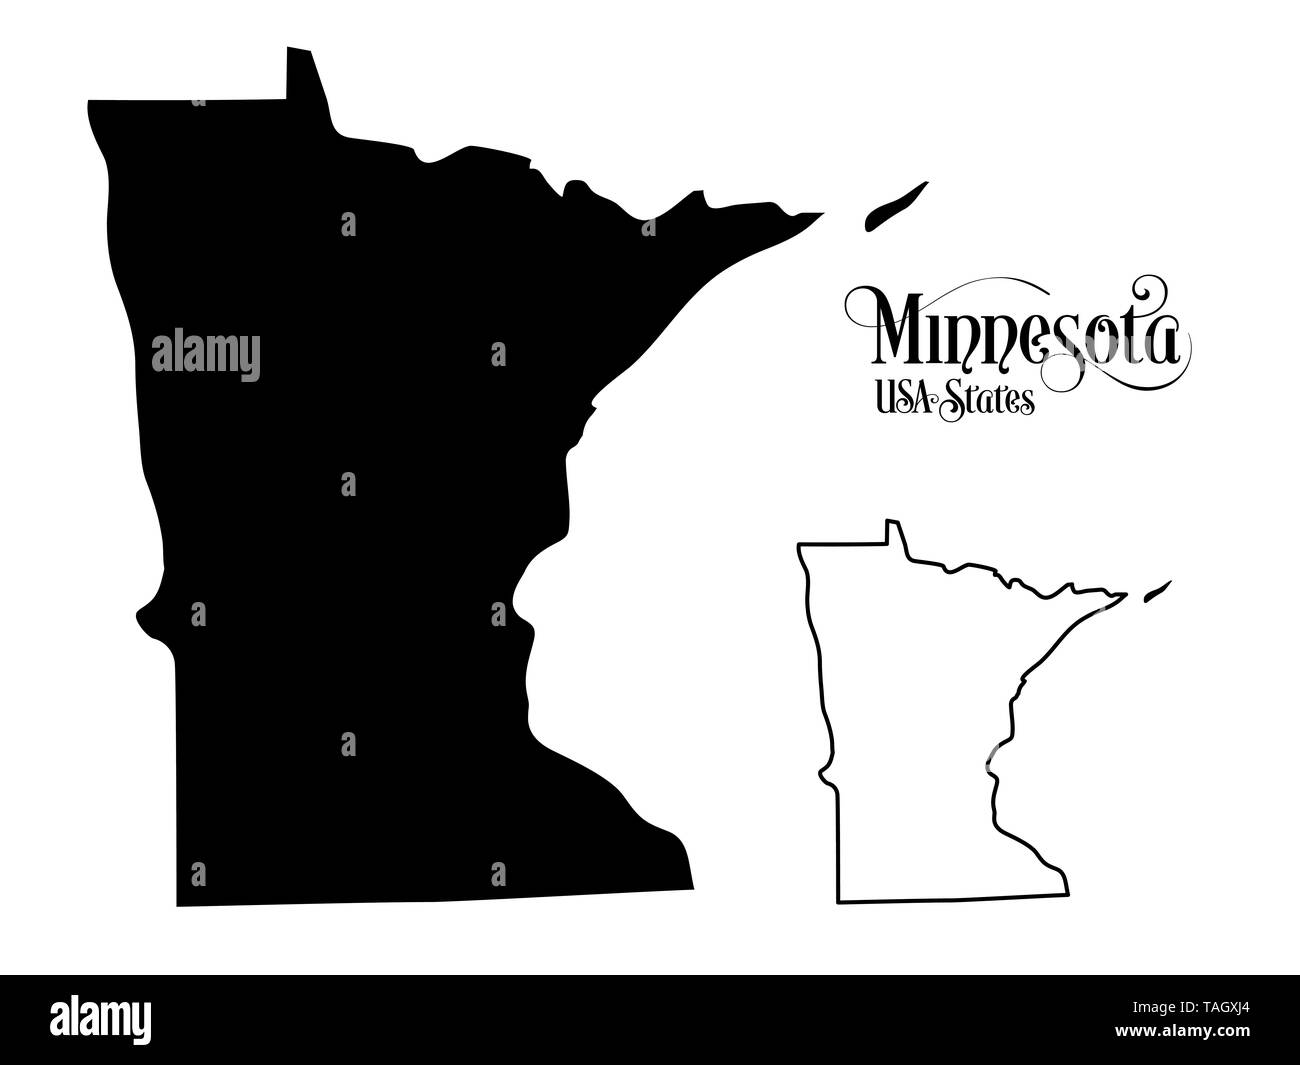 Map of The United States of America (USA) State of Minnesota - Illustration on White Background. Stock Photo